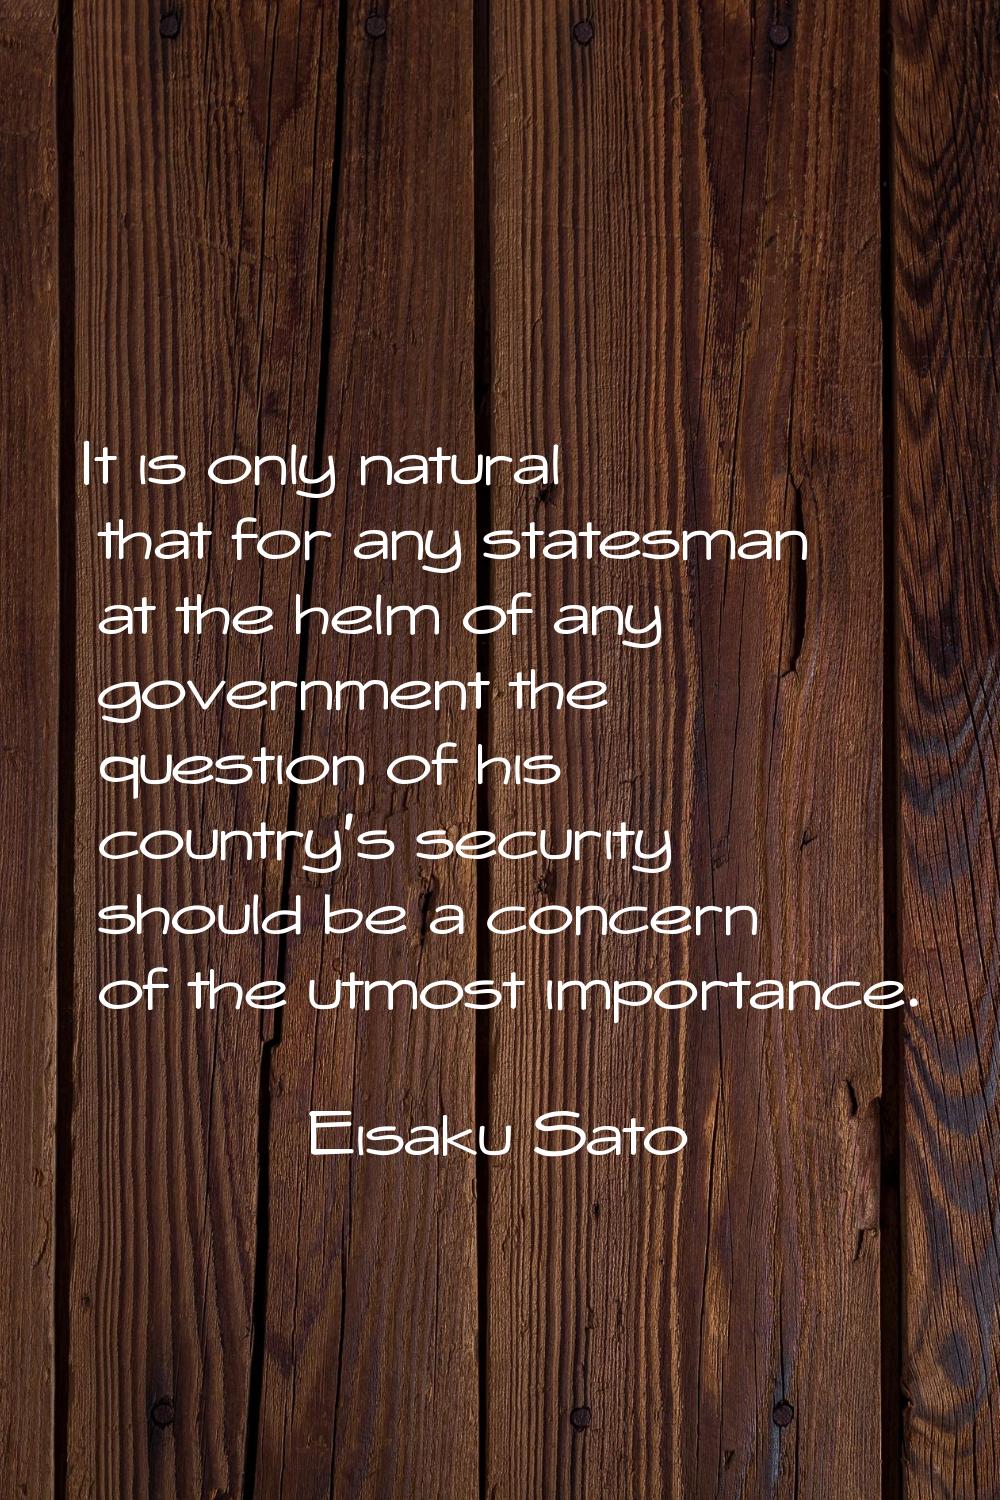 It is only natural that for any statesman at the helm of any government the question of his country